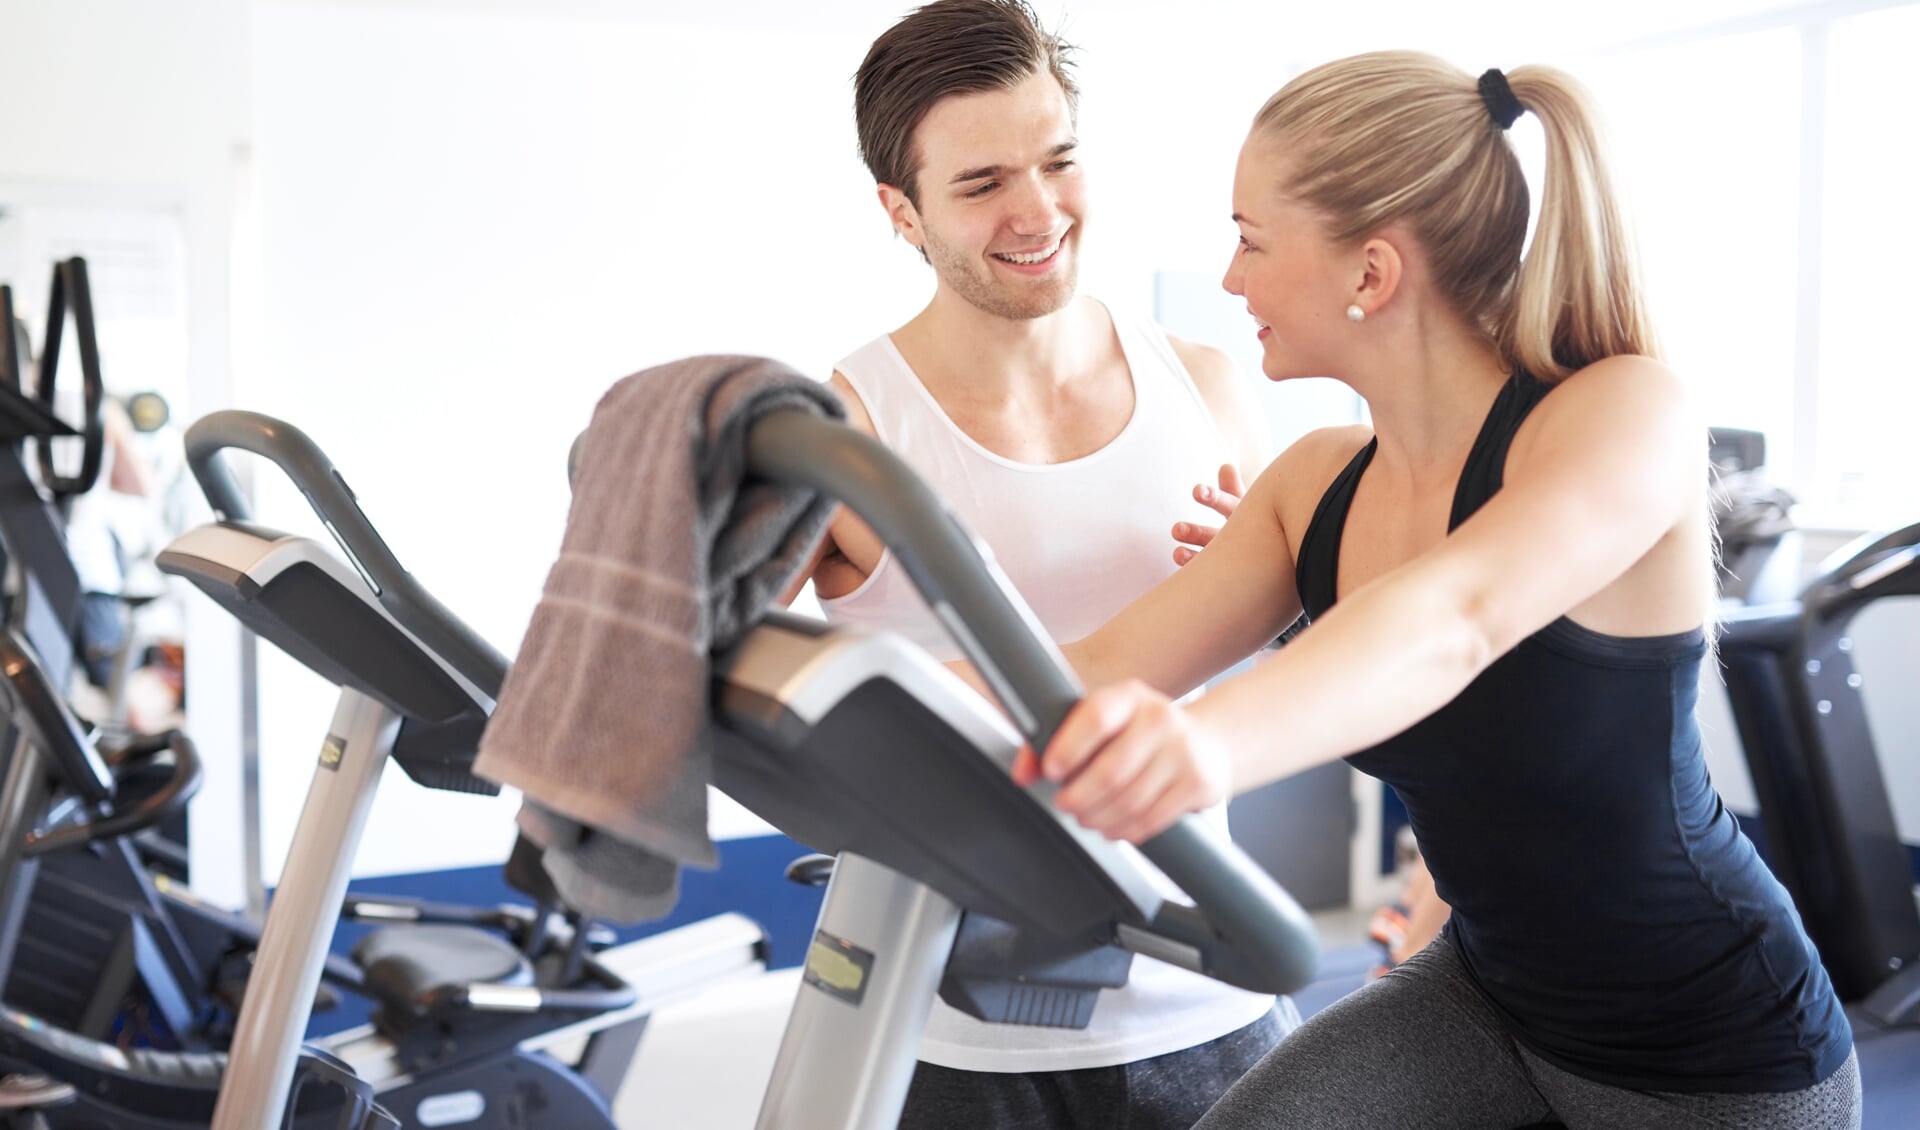 Handsome Young Fitness Trainer Explaining Something to a Young Woman While on Elliptical Bike Device Inside the Gym